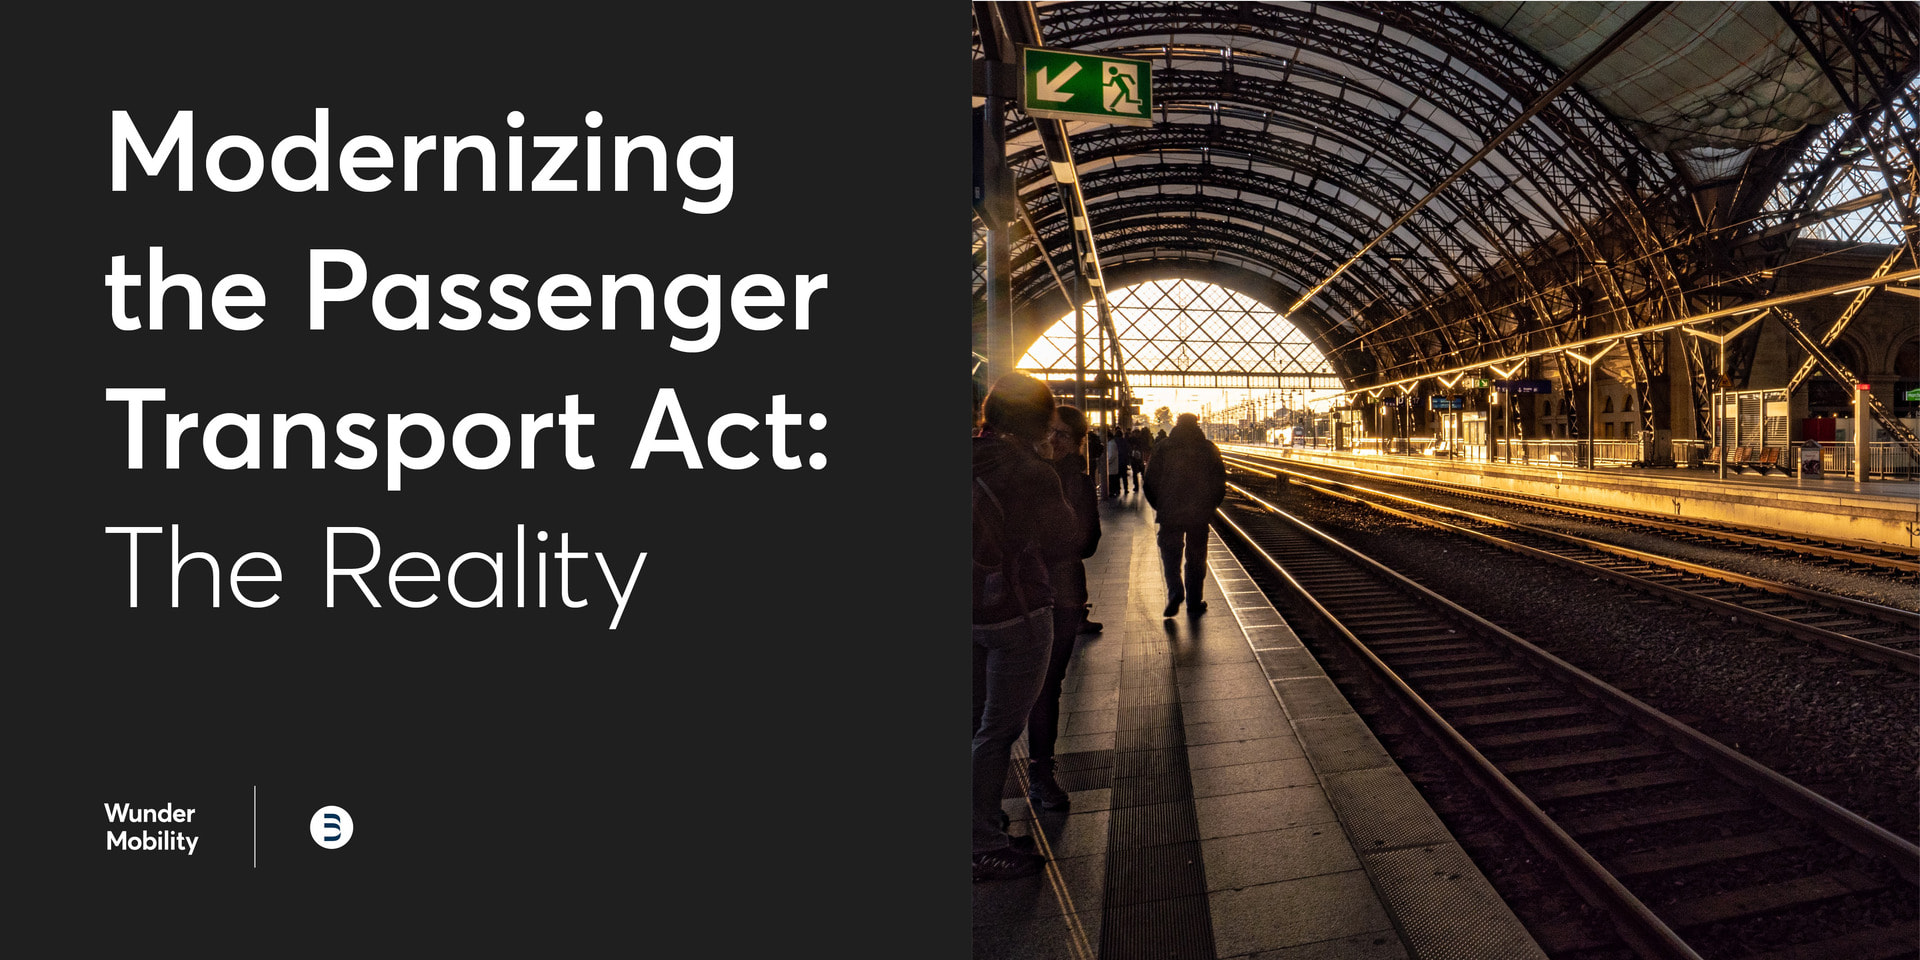 Template titled "Modernizing the Passenger Transport Act: The Reality".